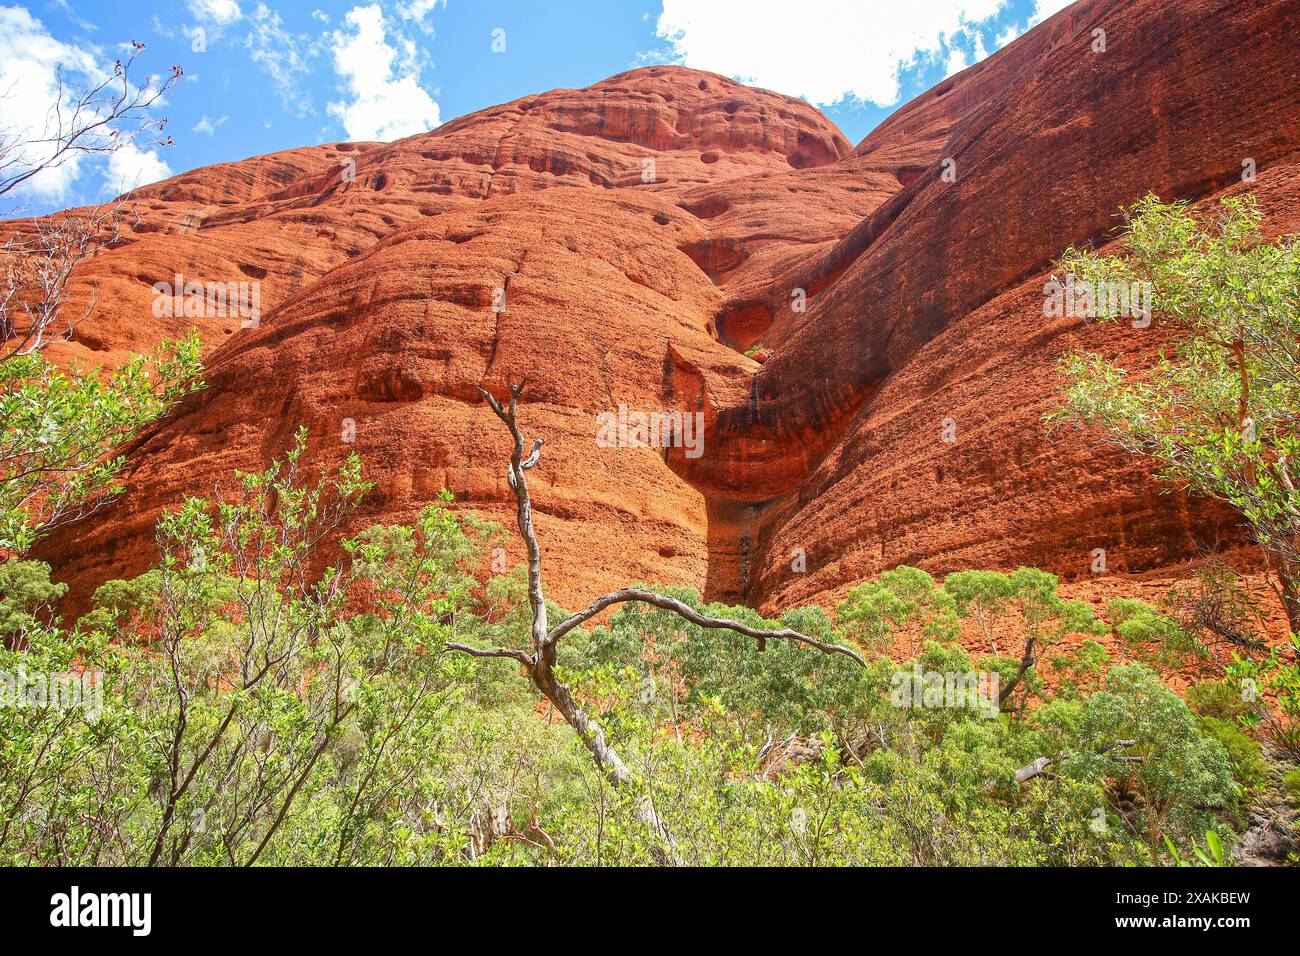 Valley of the Winds trail in Kata Tjuta aka the Olgas, large domed rock formations in Northern Territory, Central Australia - Sandstone inselberg sacr Stock Photo